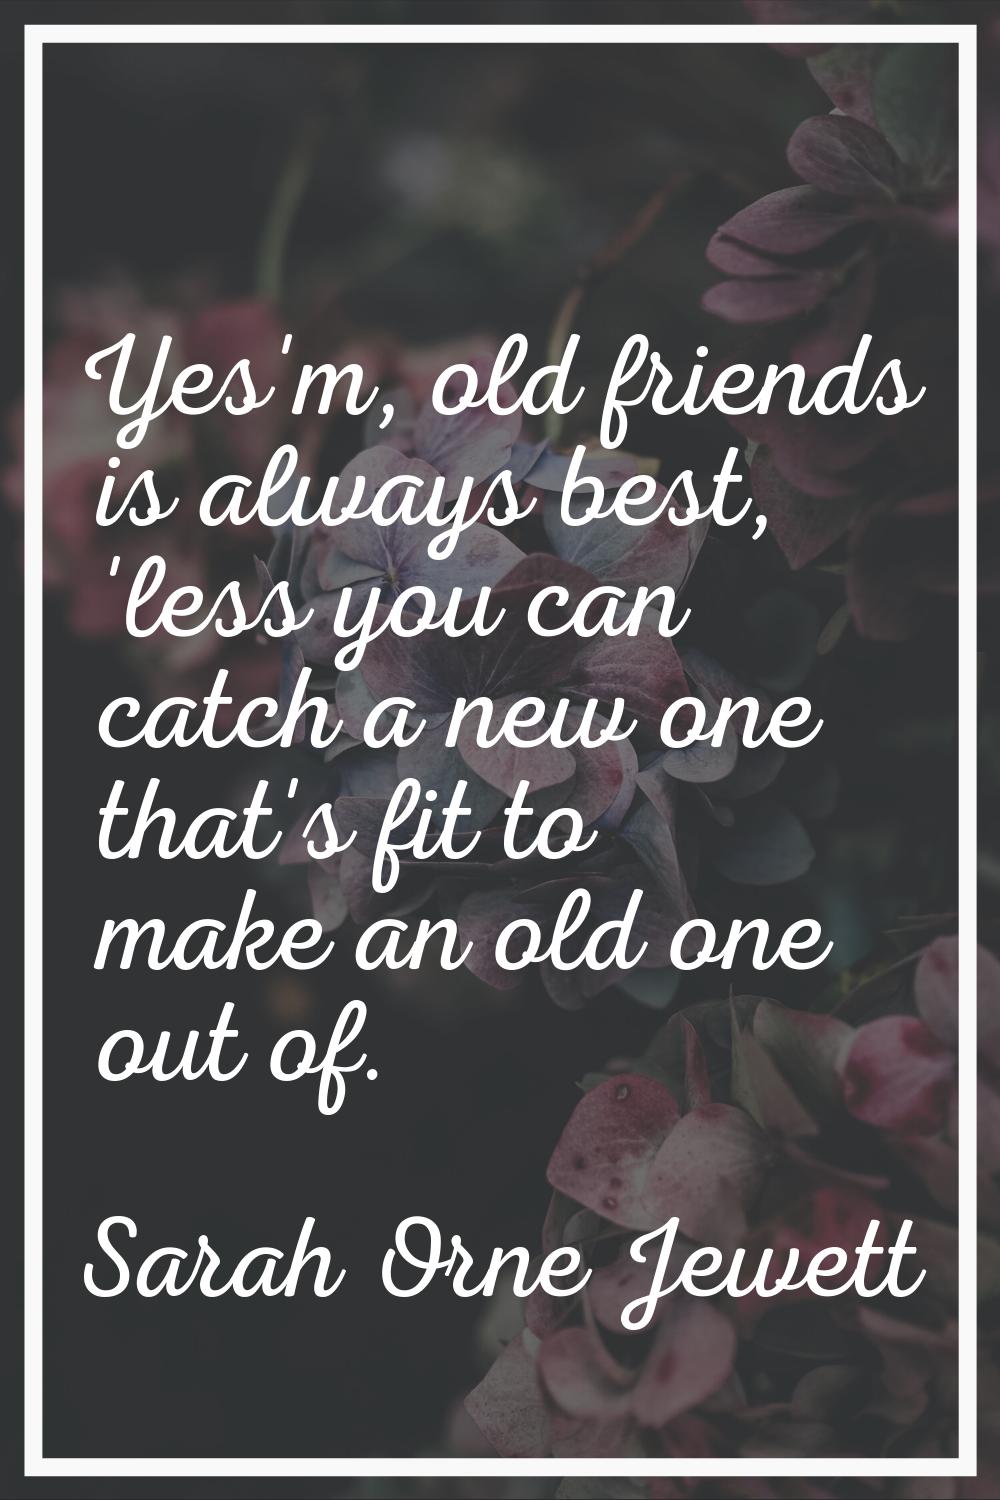 Yes'm, old friends is always best, 'less you can catch a new one that's fit to make an old one out 